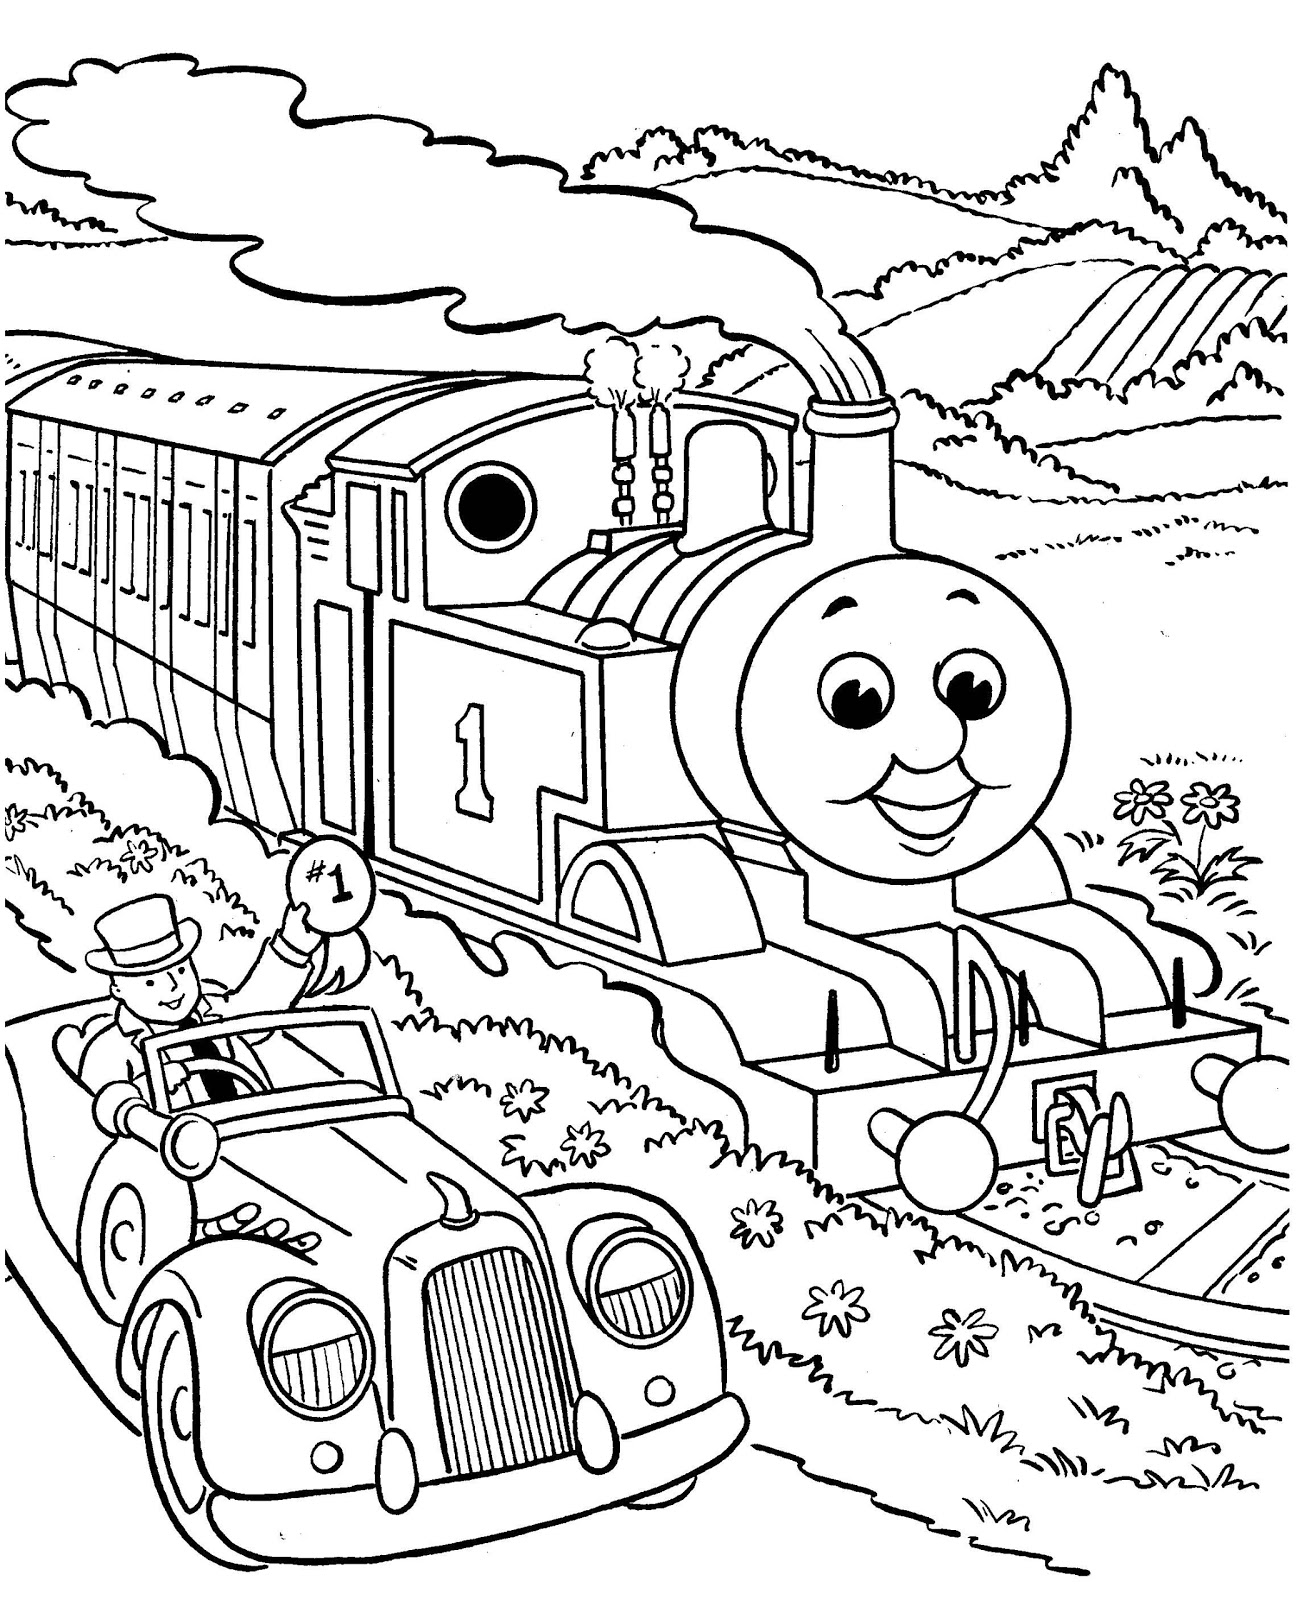 Mom39;s Daily Adventures!: Printable Coloring Pages